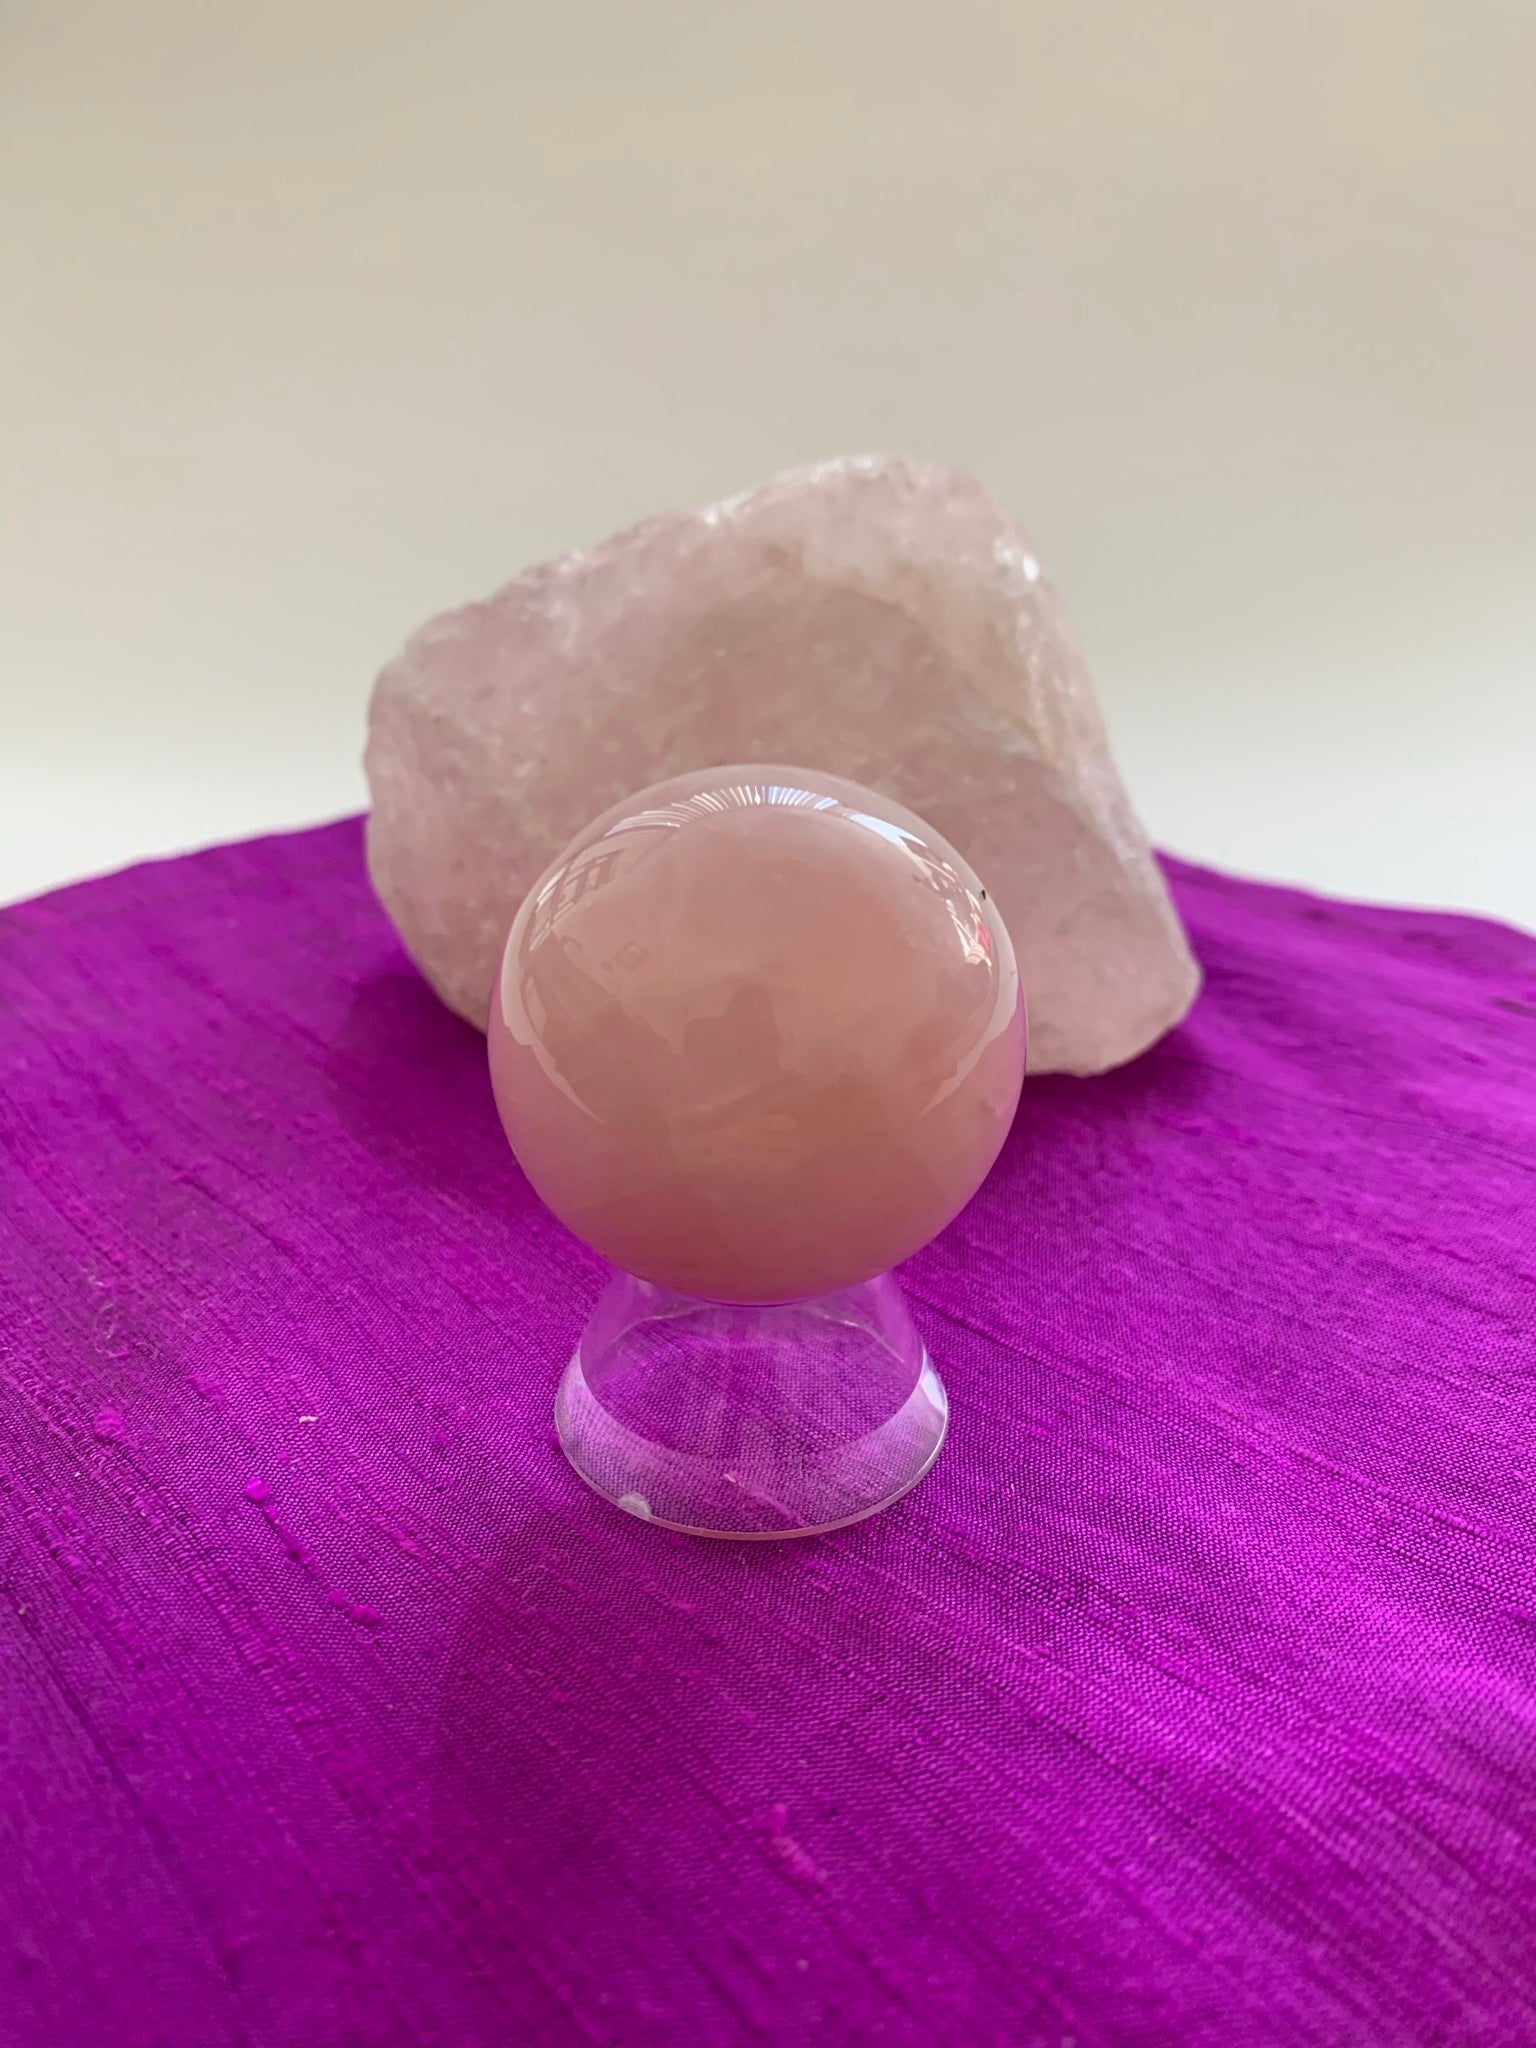 High quality Rose Quartz sphere is perfect for your altar, meditation space or to hold while meditating, or anywhere you want to radiate the energy of love ♥.  Rose quartz is the "stone of unconditional love & infinite peace." It opens the heart and soothes emotional distress. Size is approximately 2"/40mm. Plastic stand as seen in photo, is included with your purchase.